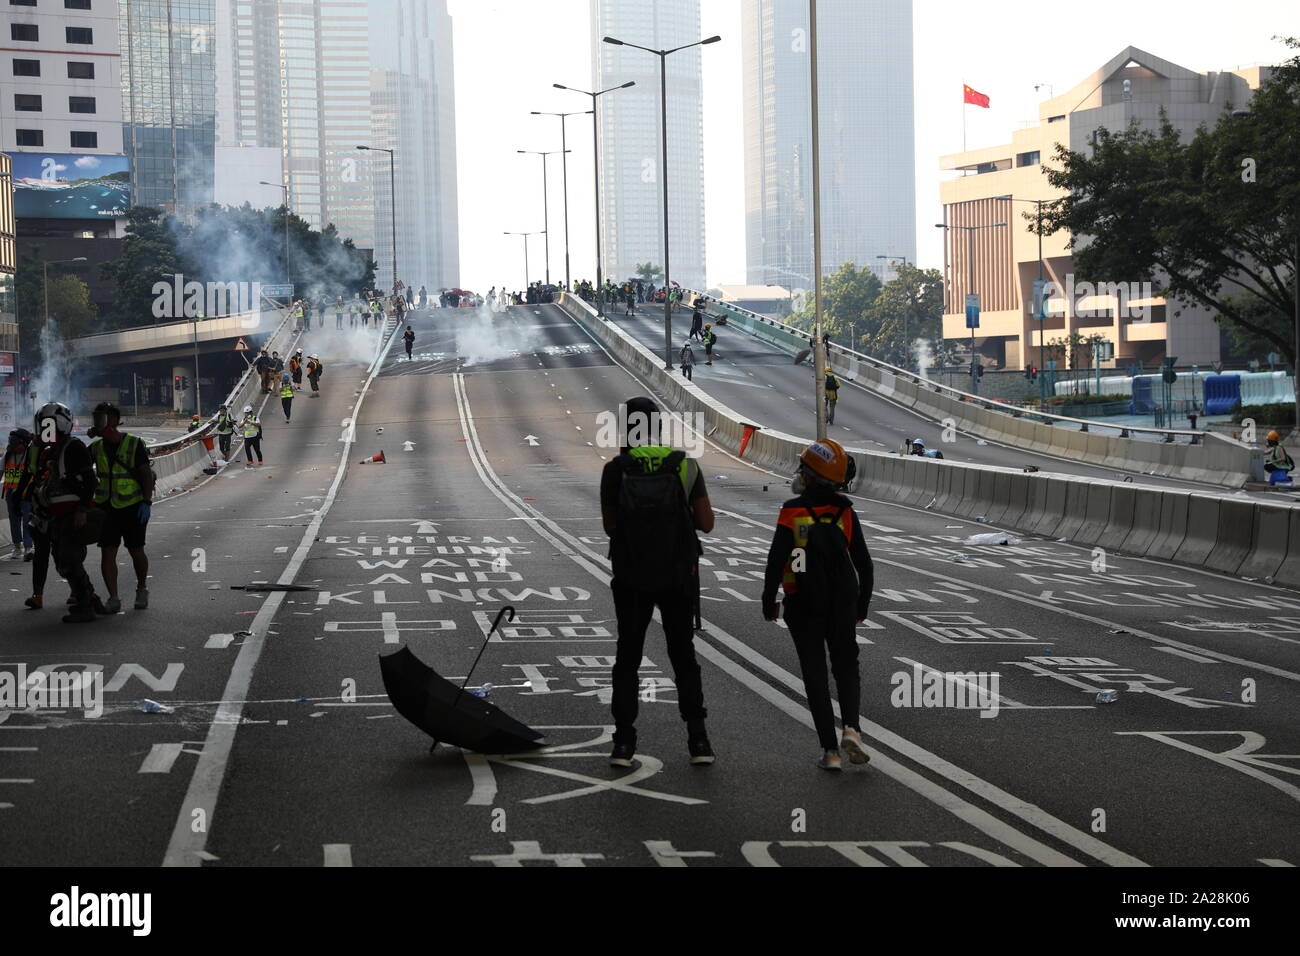 Hong Kong, China. 01st Oct, 2019. People in Hong Kong choosing not to celebrate China's National Day holiday, but instead 'no national celebration, only national mourning' . With events happening throughout Hong Kong. Credit: David Coulson/Alamy Live News Stock Photo